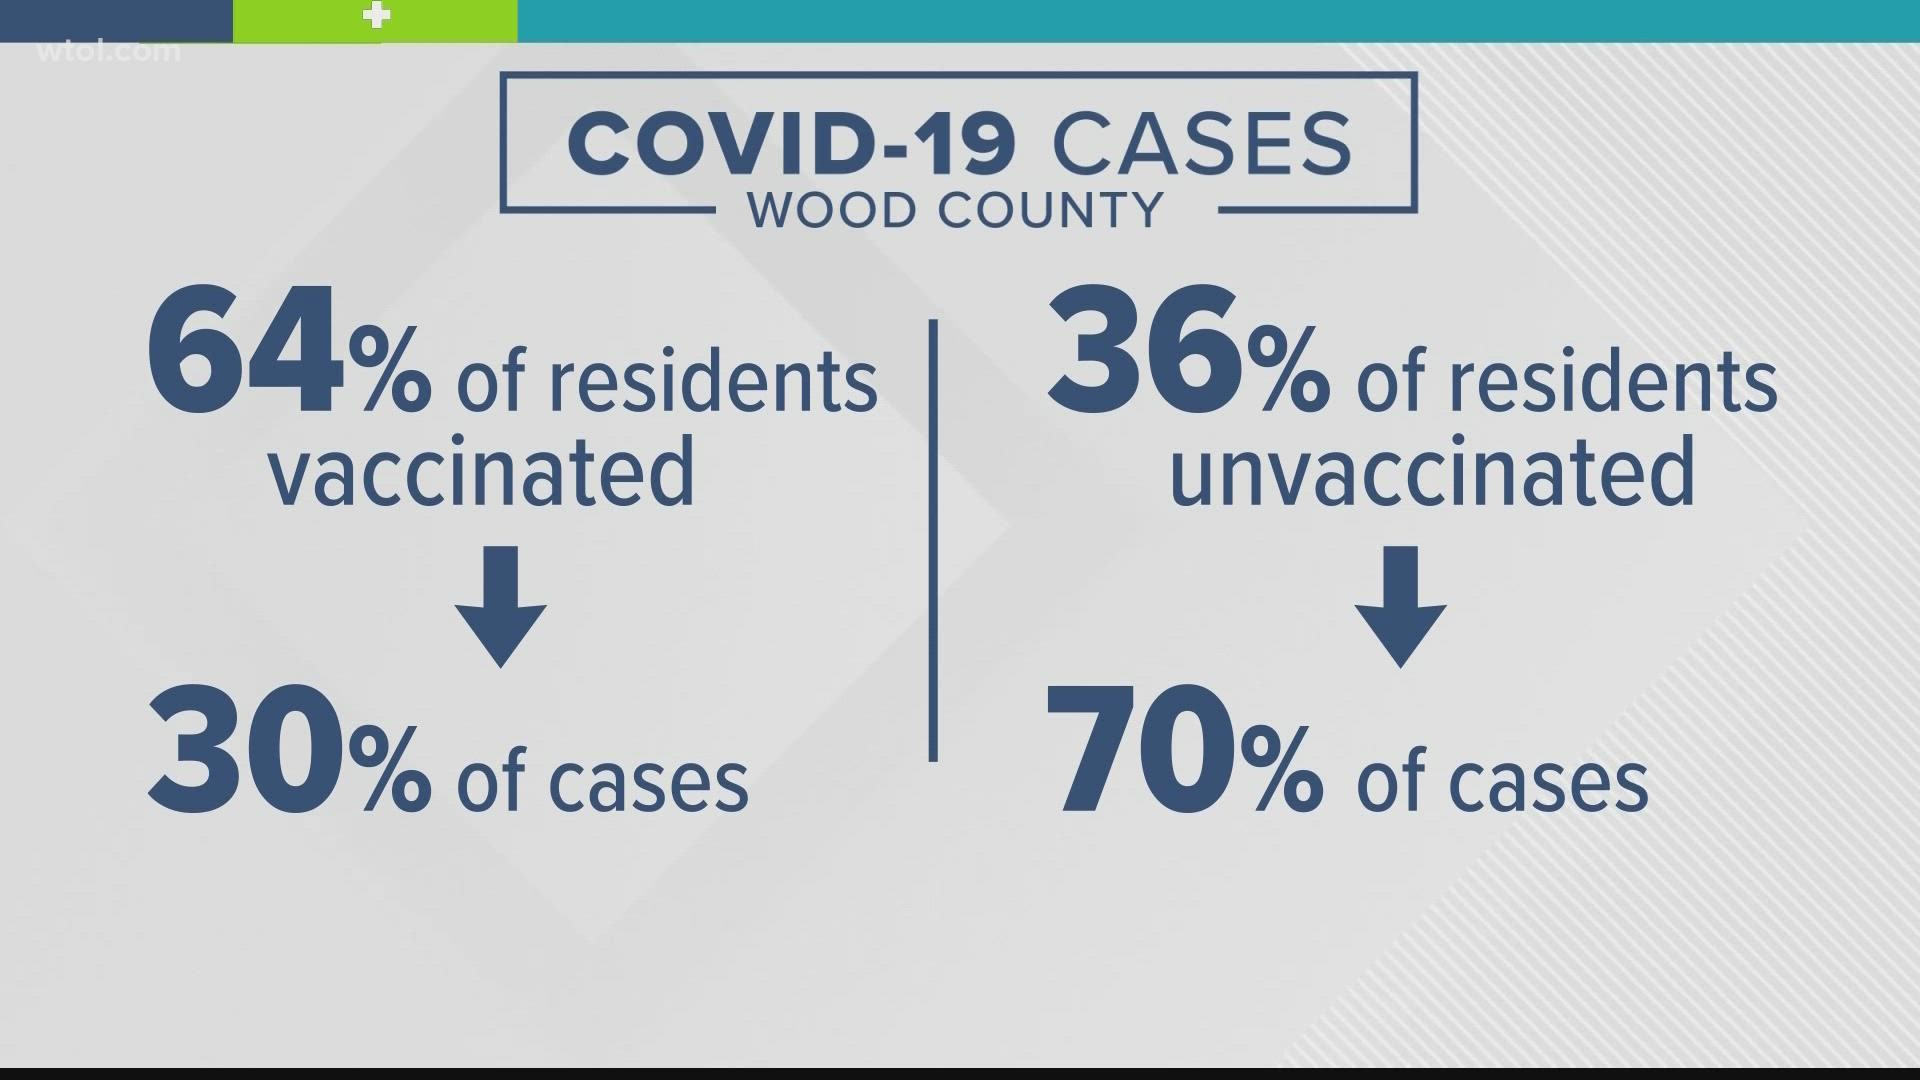 Health commissioner Ben Robison says they started looking at vaccinated versus unvaccinated Wood County residents on August 1 when the Delta variant was spreading.